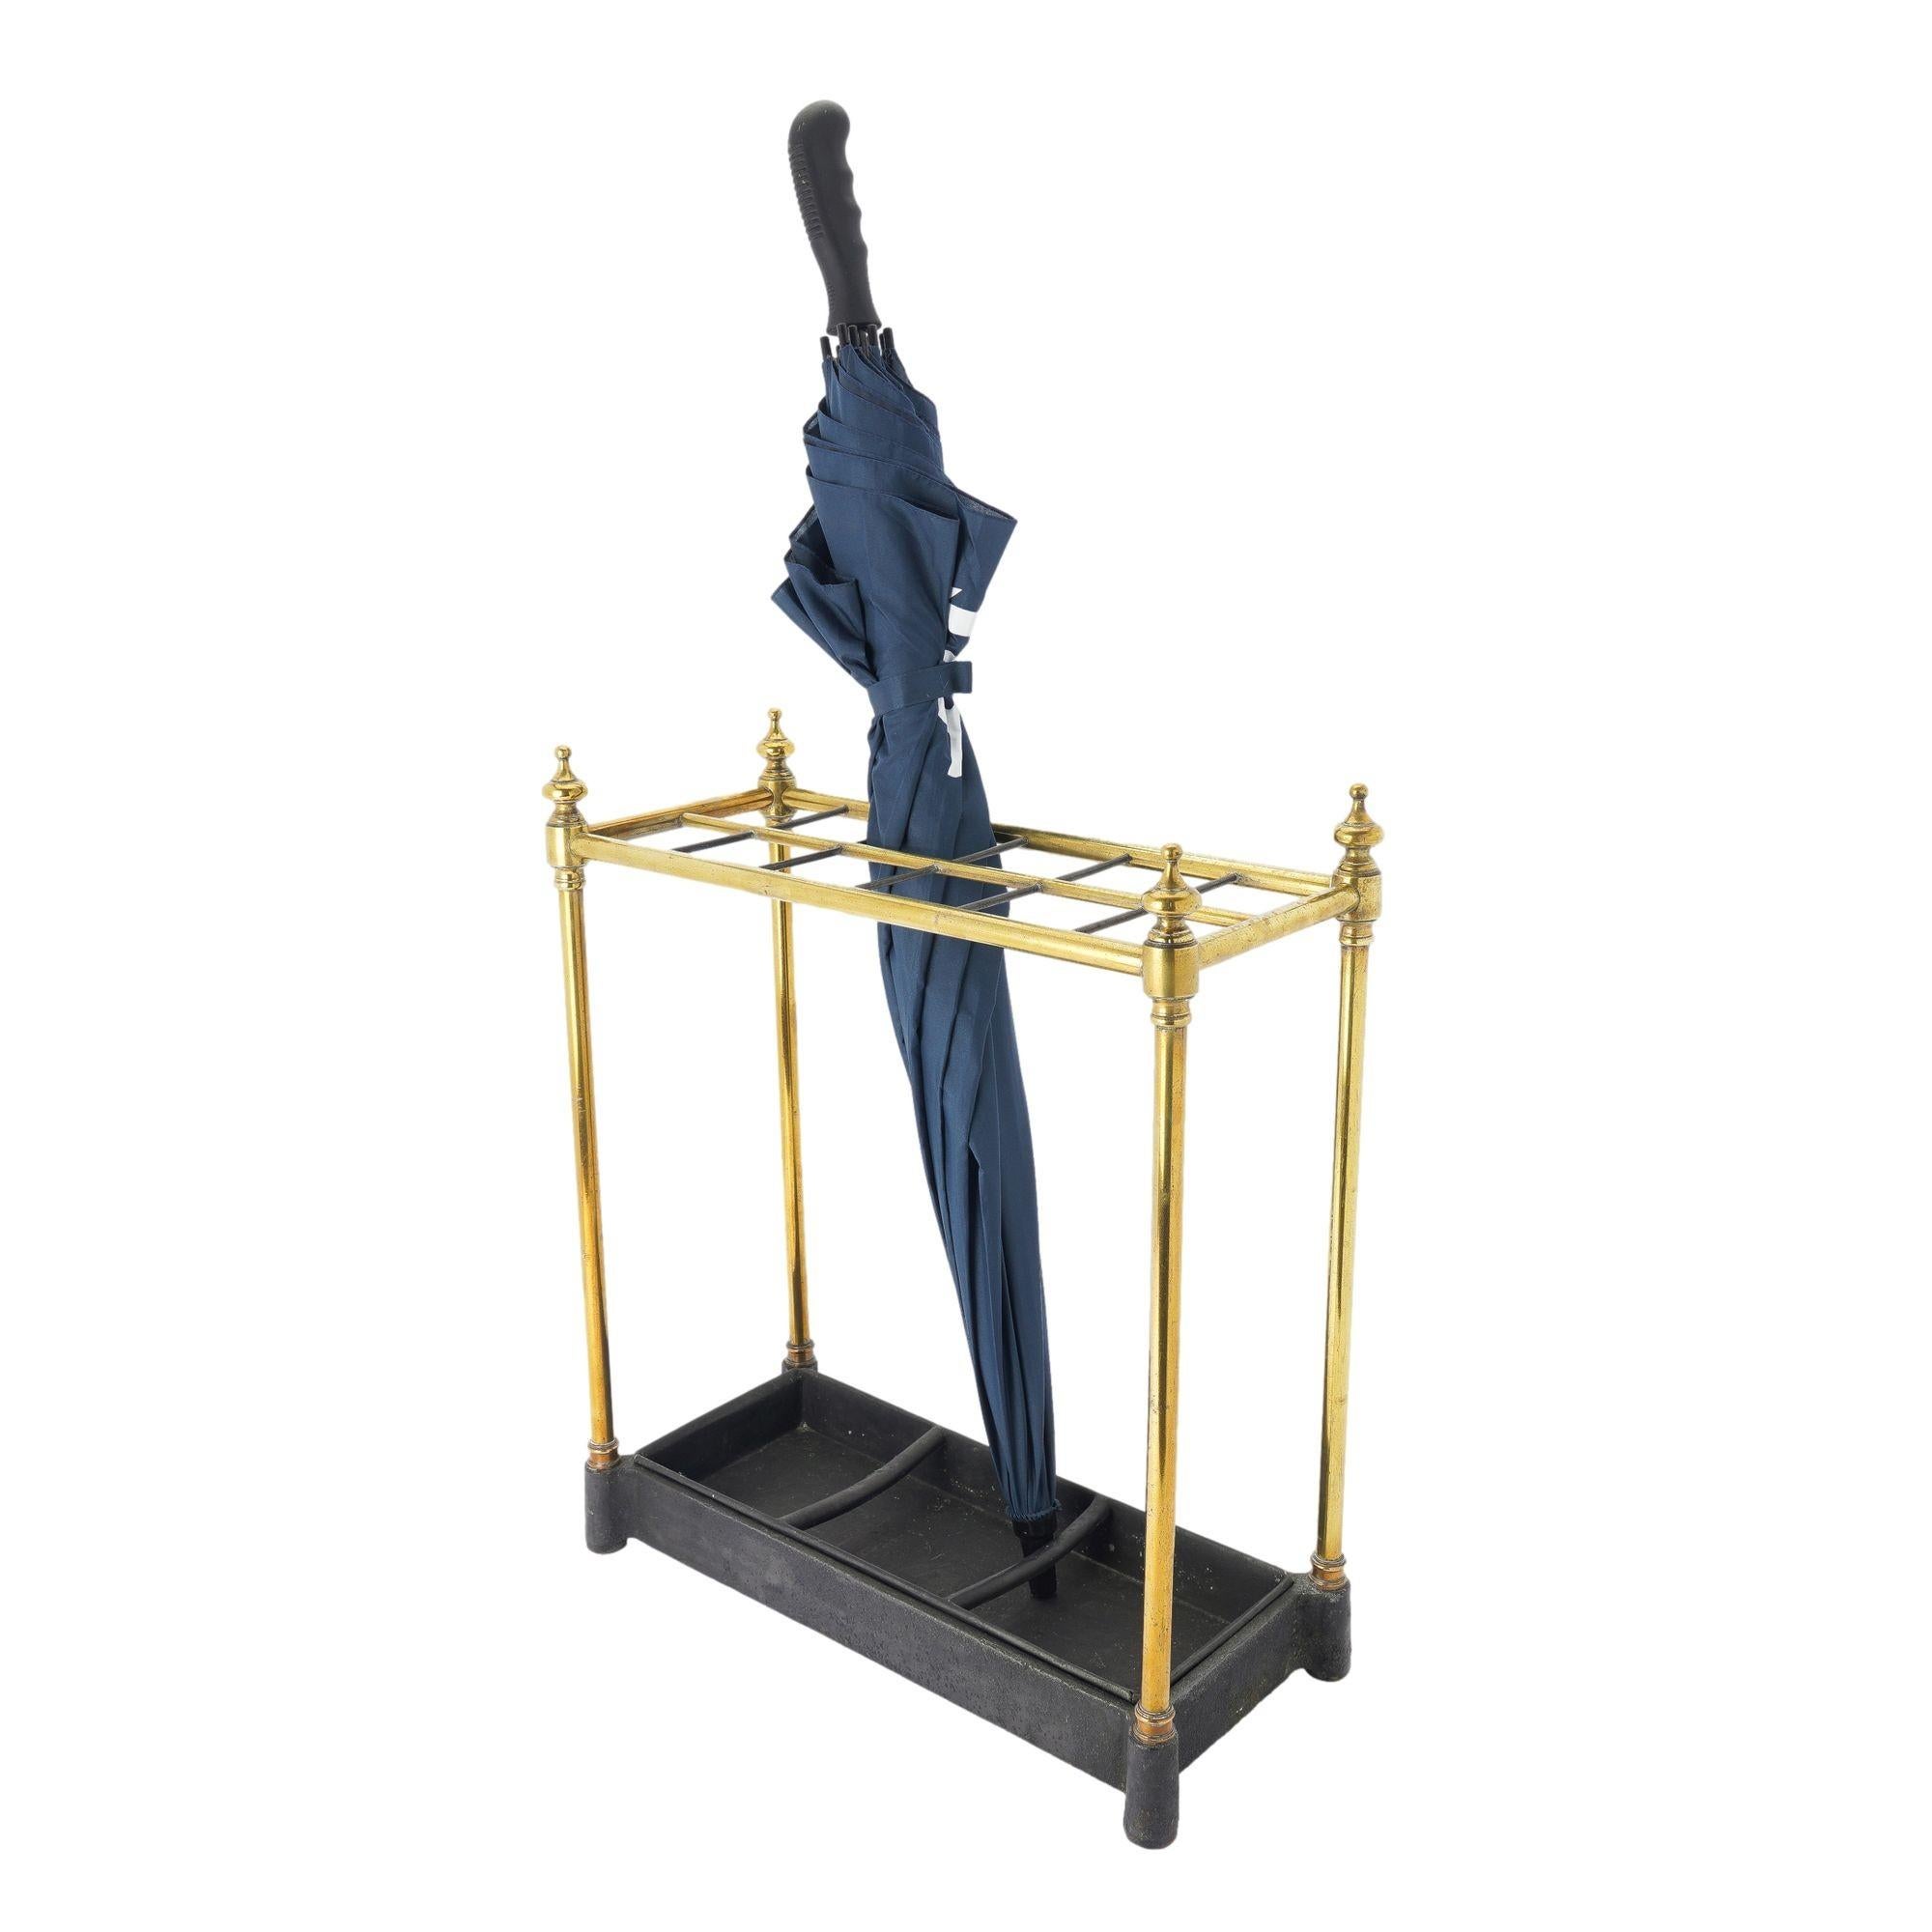 Generously sized rectangular umbrella stand in brass, cast iron, and sheet metal. The cast iron base features turreted corners for brass rod vertical supports, and the top frame is divided into 12 sections, providing ample room for umbrellas, canes,